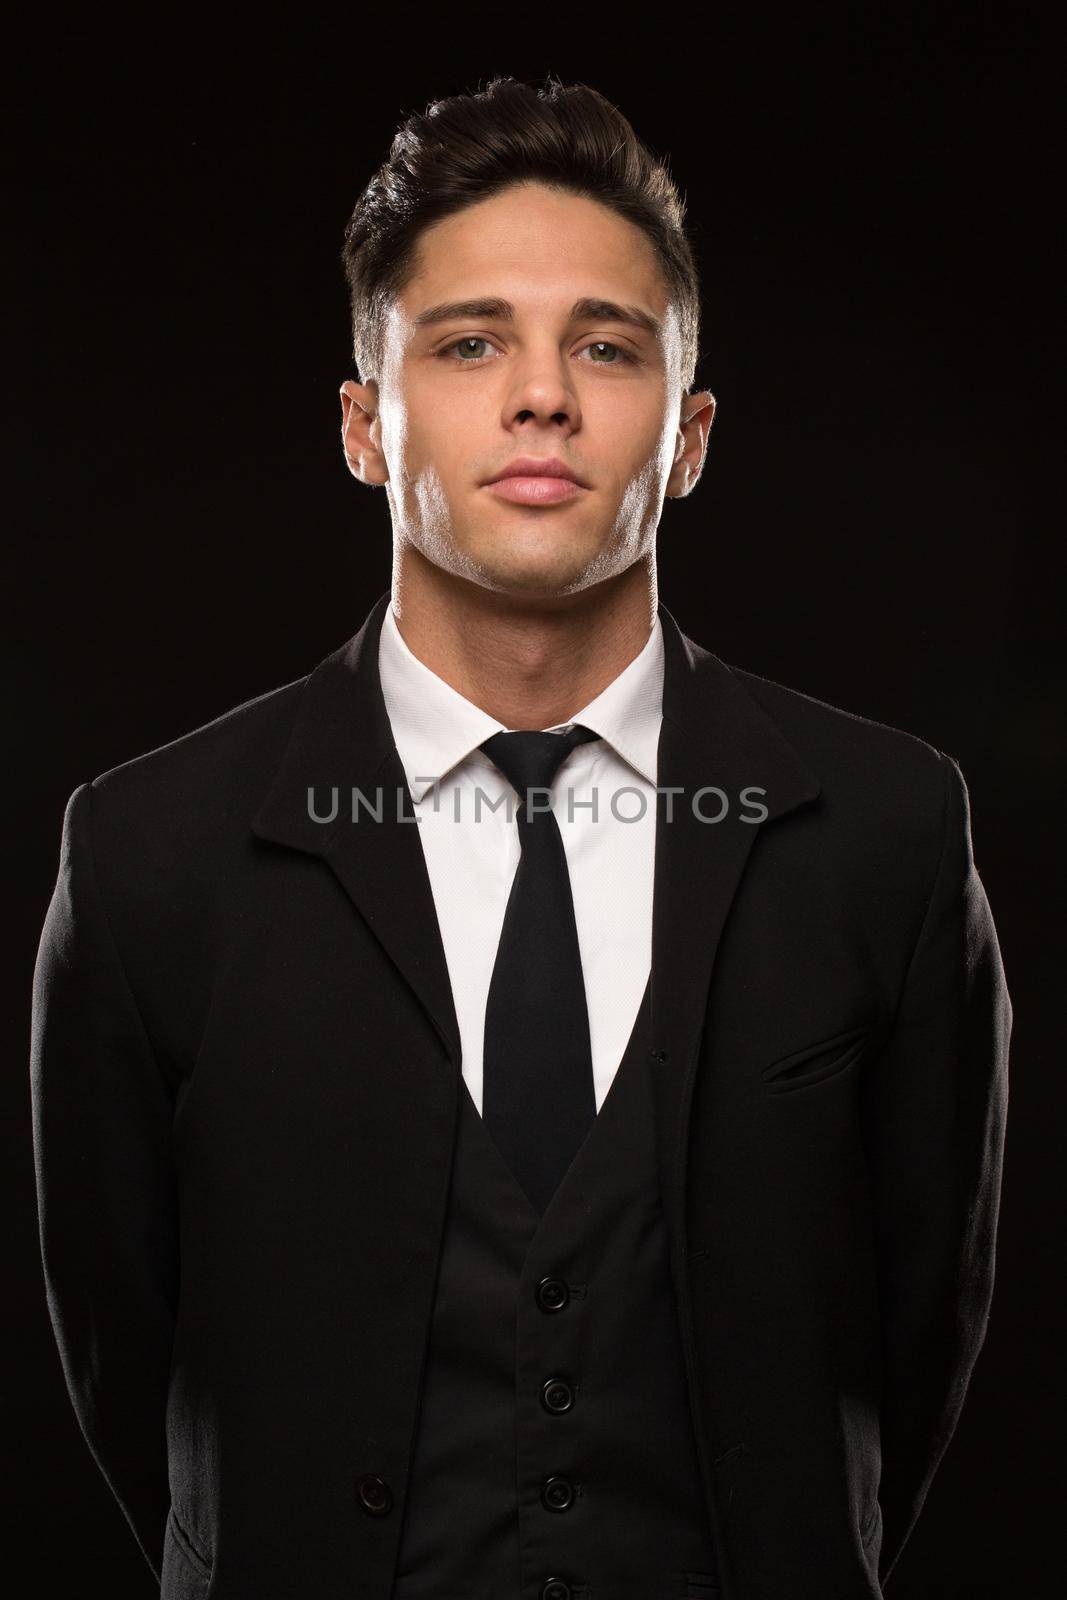 Vertical studio portrait of a handsome young secret service agent wearing black suit and a tie posing fiercely and confidently on black background safety bodyguard profession masculinity fearless